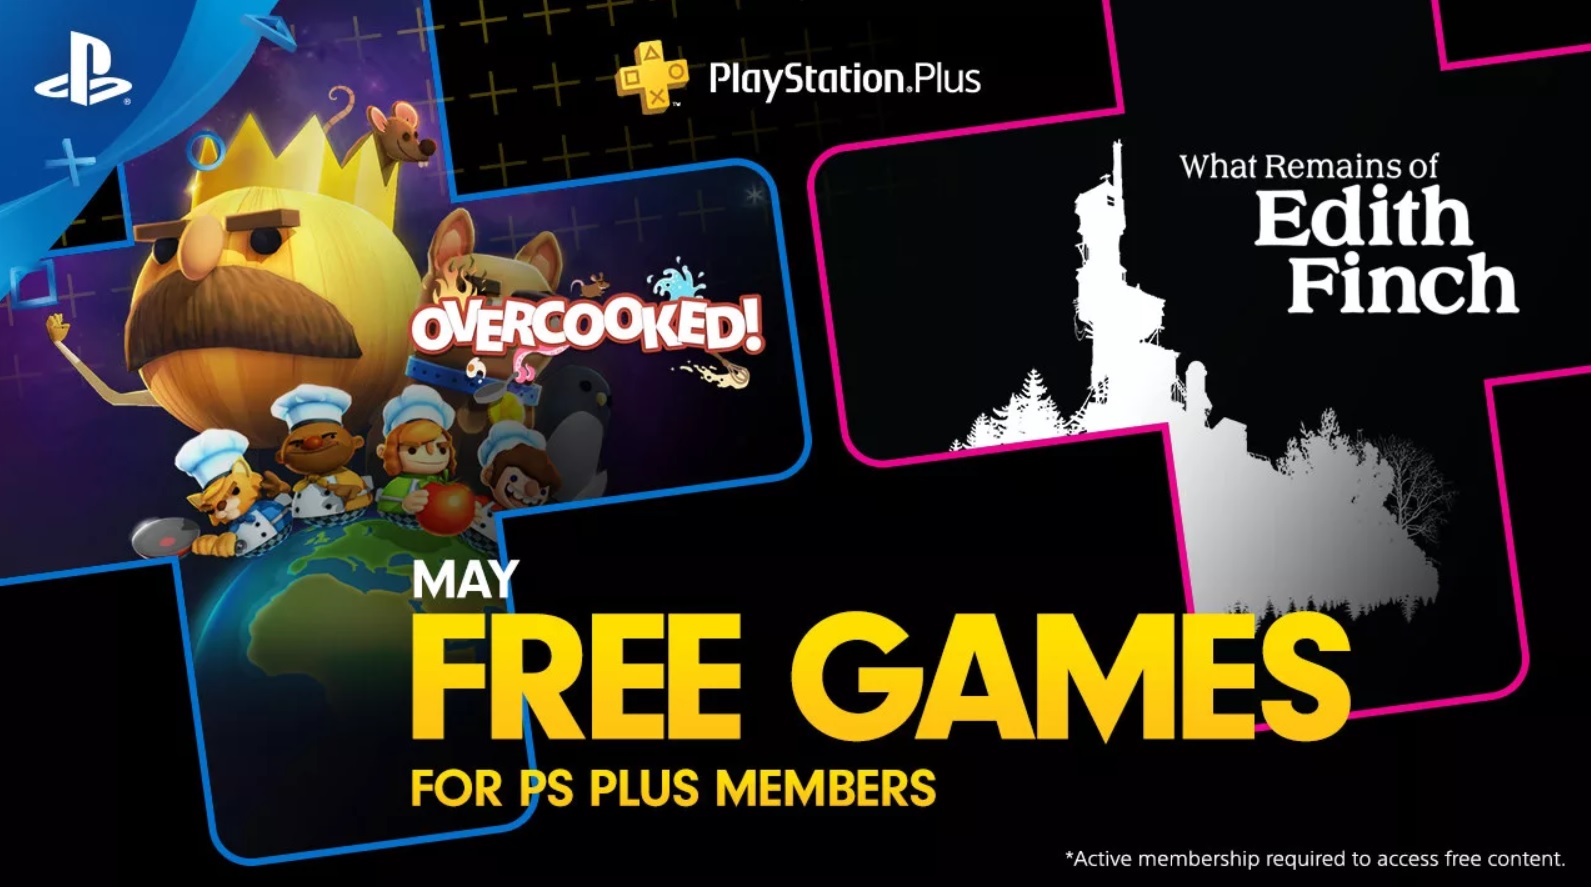 PlayStation Plus free games for May 2019 ‘What Remains of Edith Finch